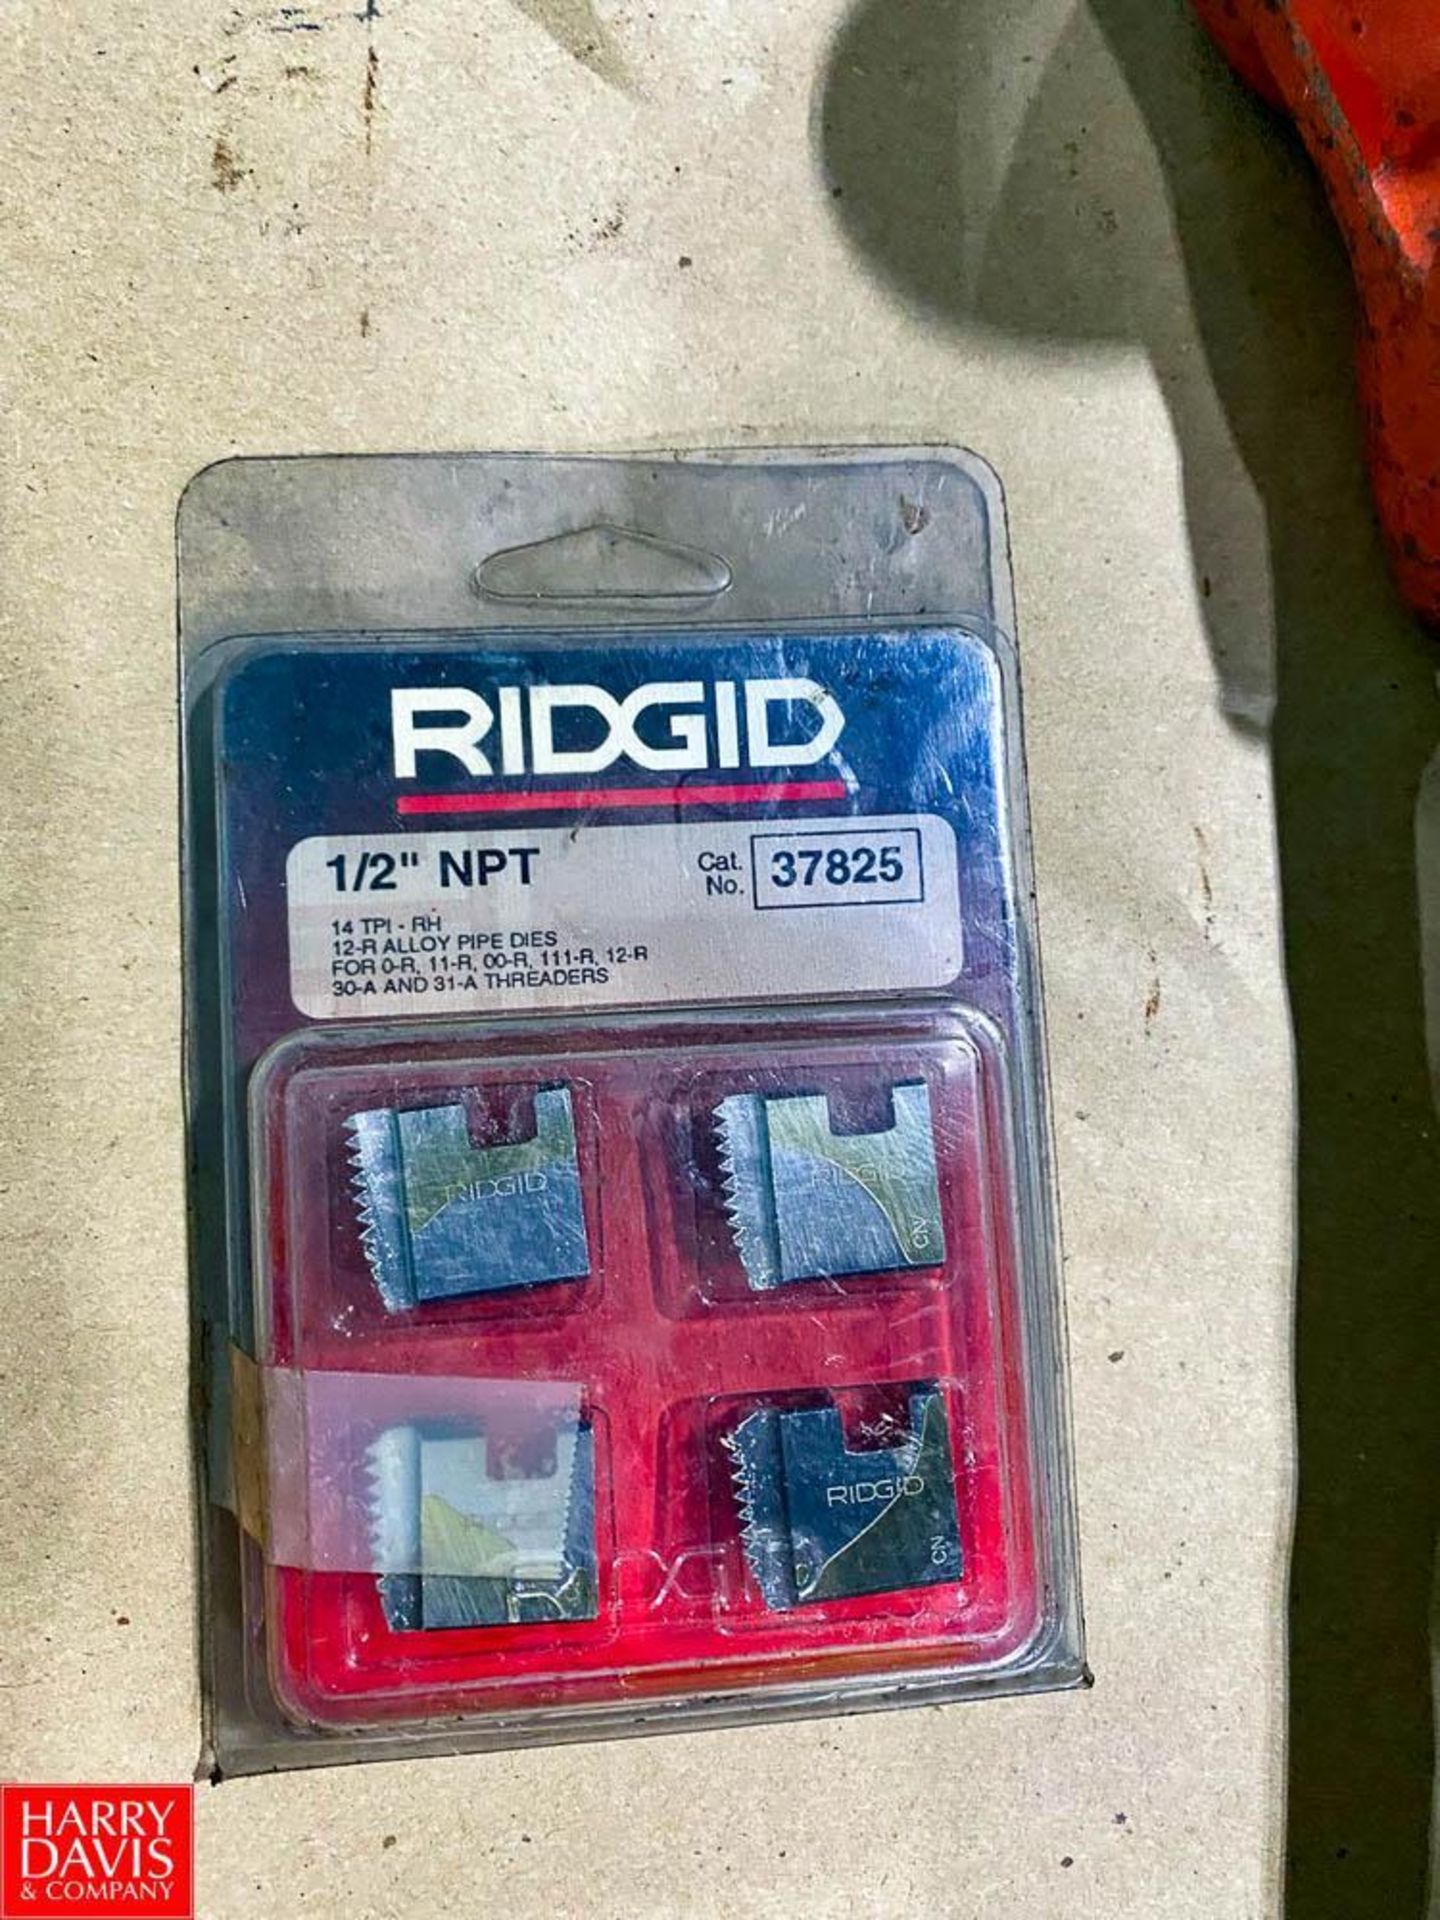 Ridgid (2) Pipe Threader with (3) No. 12 Various Size Dies (Ranging from 1'', 2'', 1/2'', 1/4'' and - Image 6 of 6